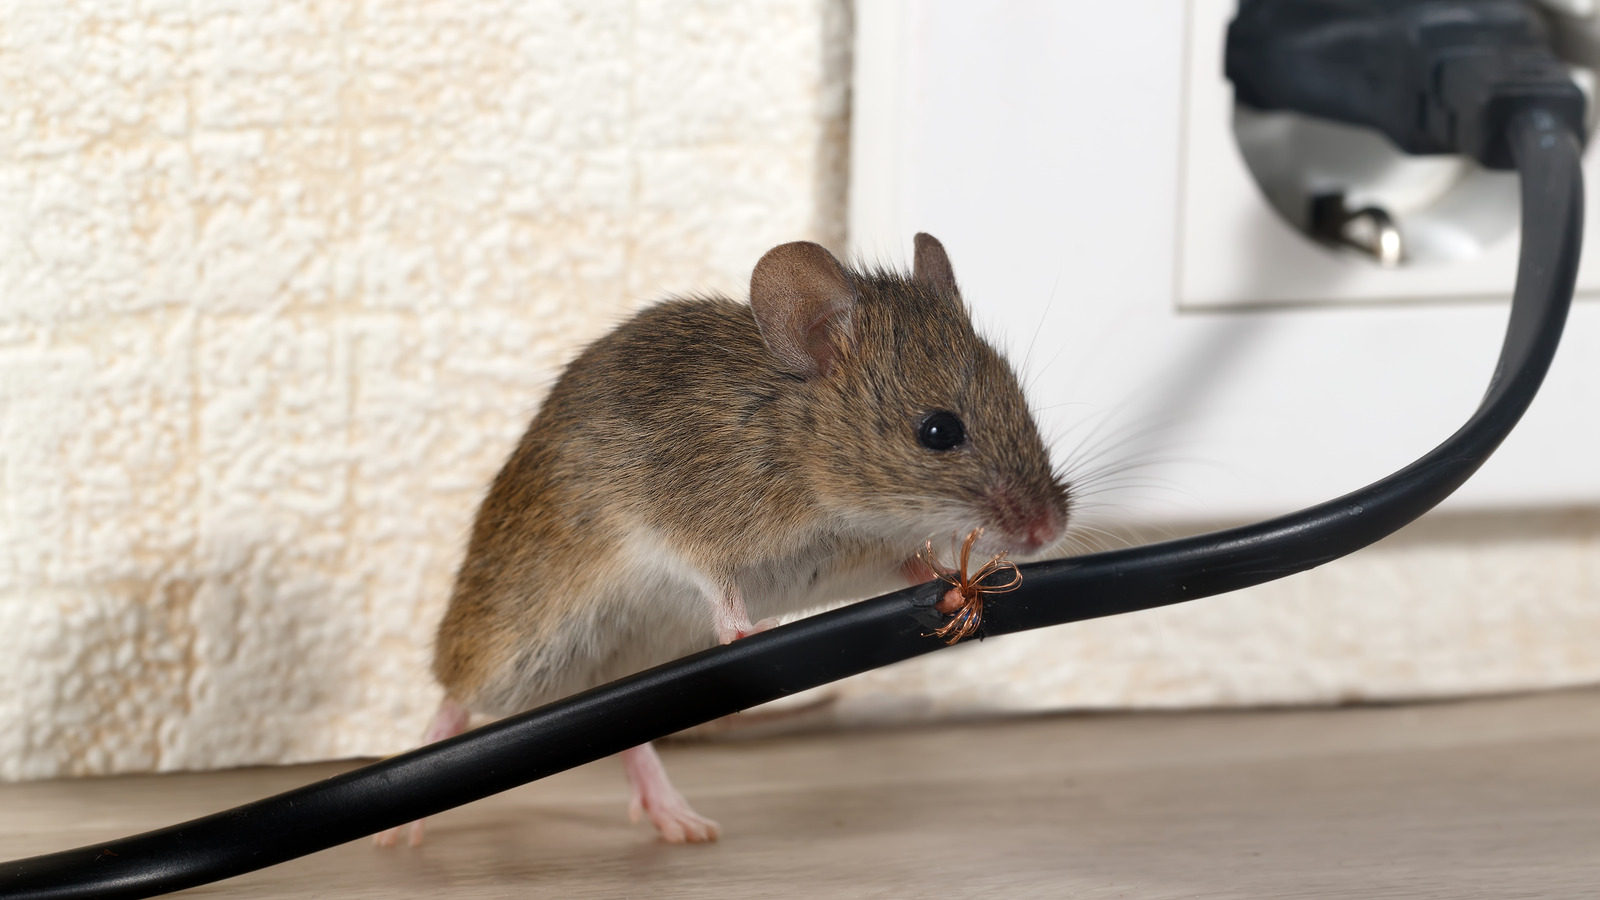 https://www.housedigest.com/img/gallery/an-old-shoebox-is-the-secret-to-ridding-your-home-of-pesky-mice/l-intro-1692122425.jpg